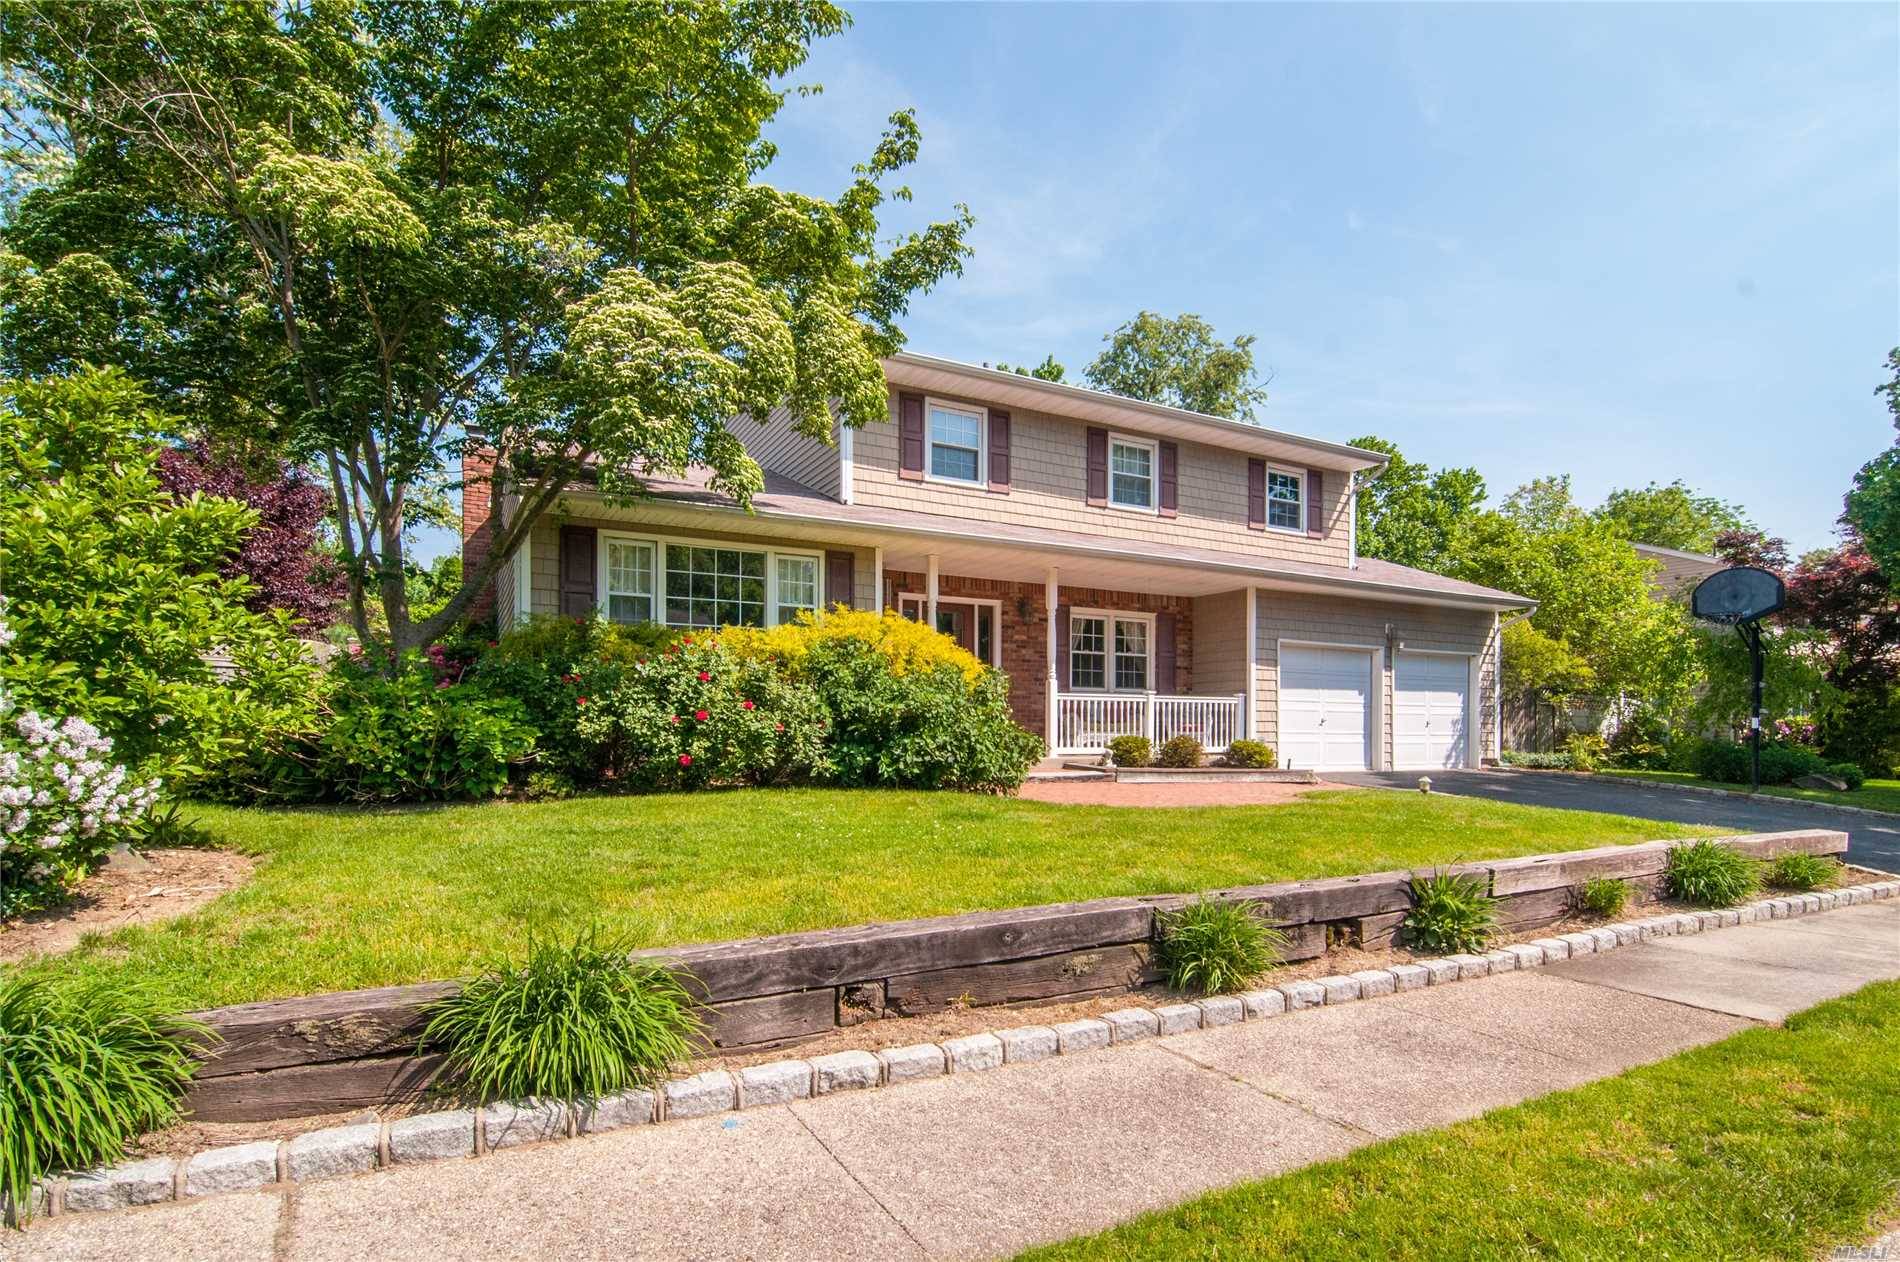 Move Right Into This Beautiful Updated Ctr Hall Colonial In Harborfields S.